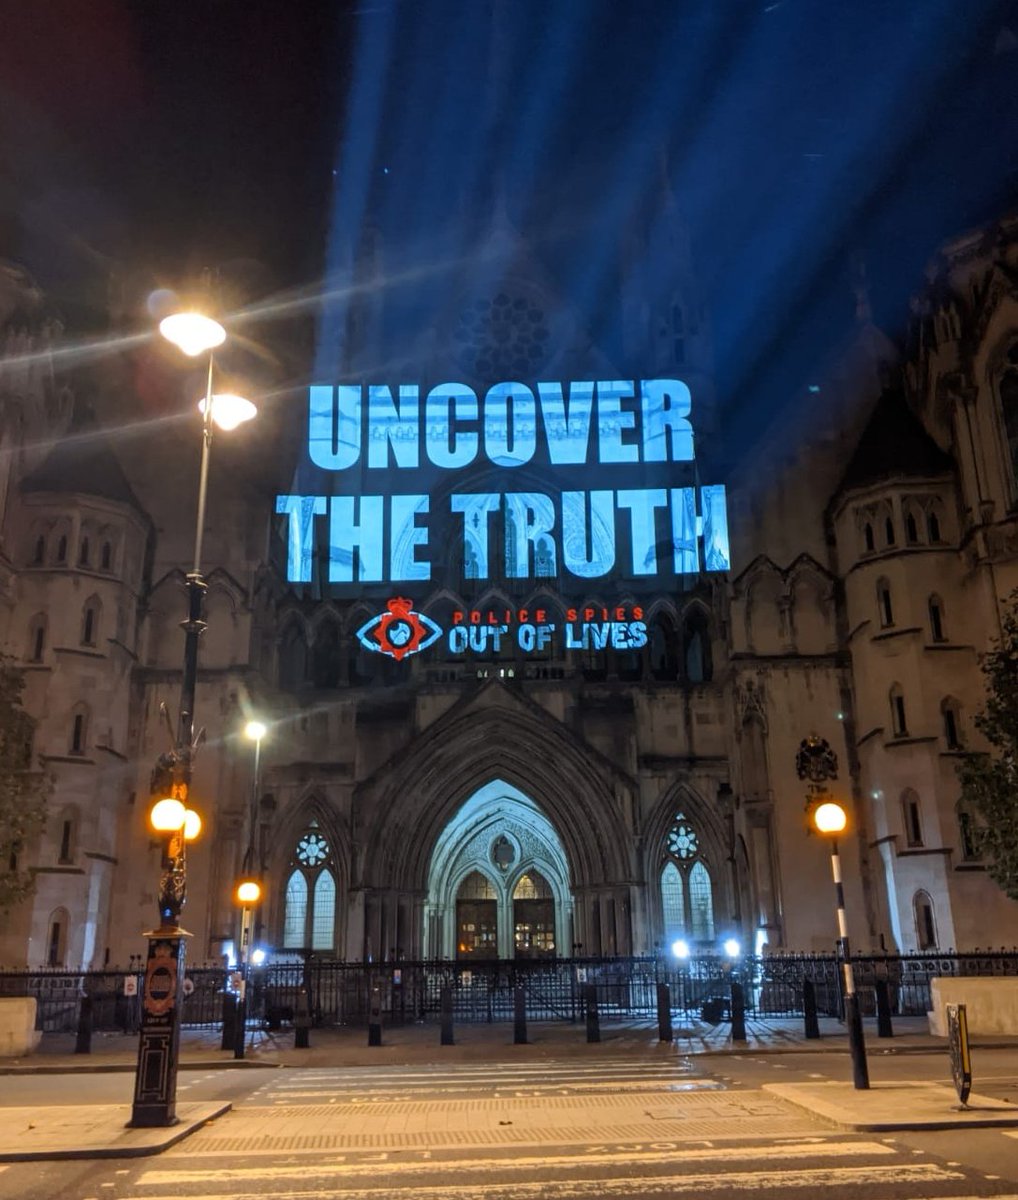 It's time for the truth about secret political policing in the UK.We demand full disclosure to those spied on and full public access to the  #SpyCopsInquiry STOP THE  #spycops COVER UP